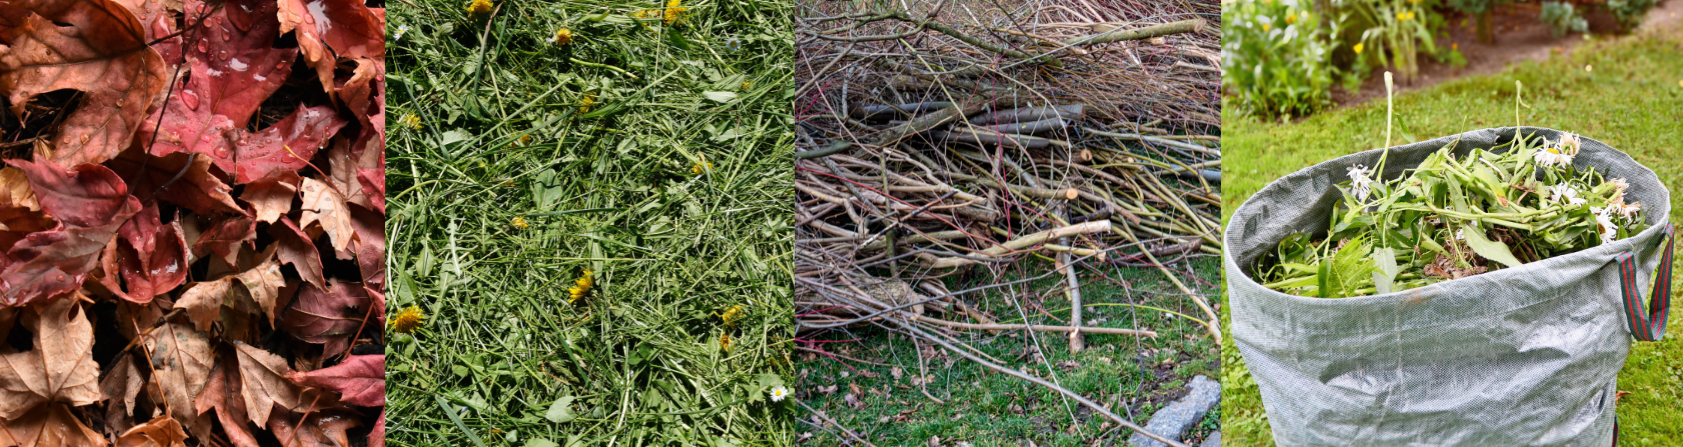 Row of pics shows dried leaves, grass cllippings, a pile of small diameter brush, and a bag of weeds, all types of yard waste